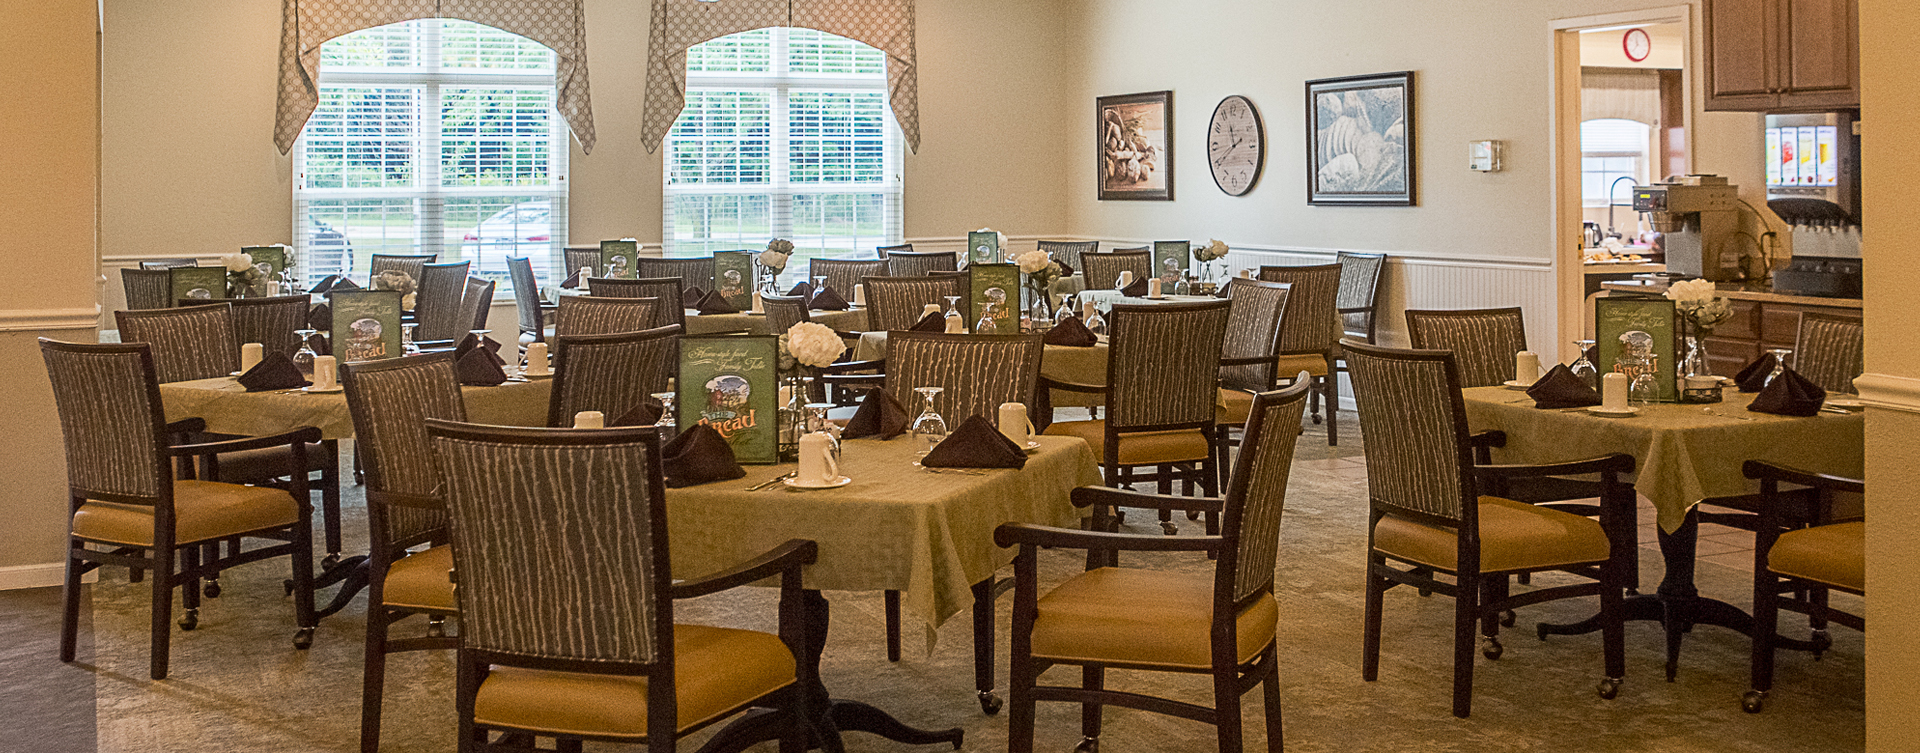 Enjoy homestyle food with made-from-scratch recipes in our dining room at Bickford of Iowa City